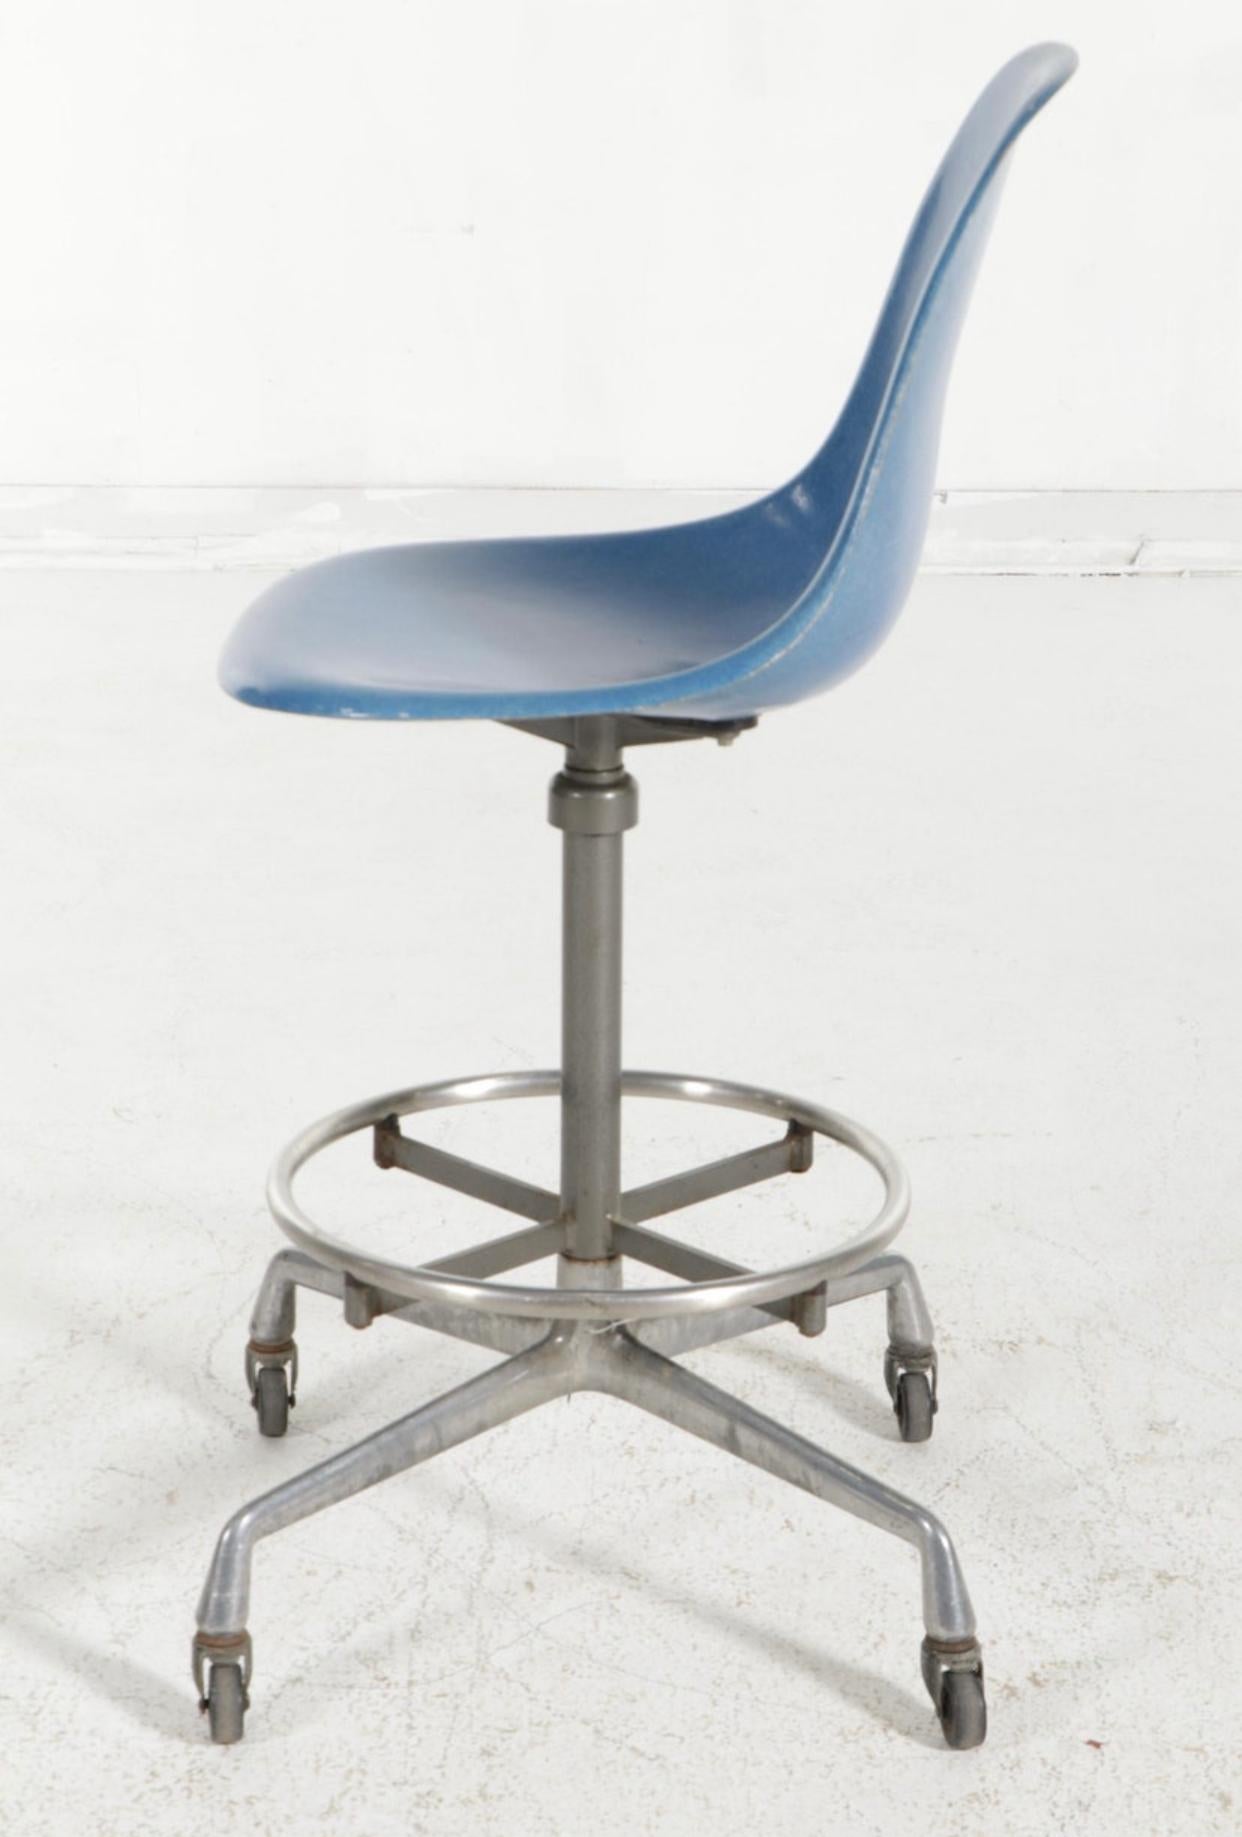 Gorgeous and rare Eames drafting stool produced by Herman Miller. Circa 1970s with cast aluminum base with wheels and adjustable height. Features rare color shell in Medium Blue. Gorgeous fiberglass texture and waterfall edge provide comfort for